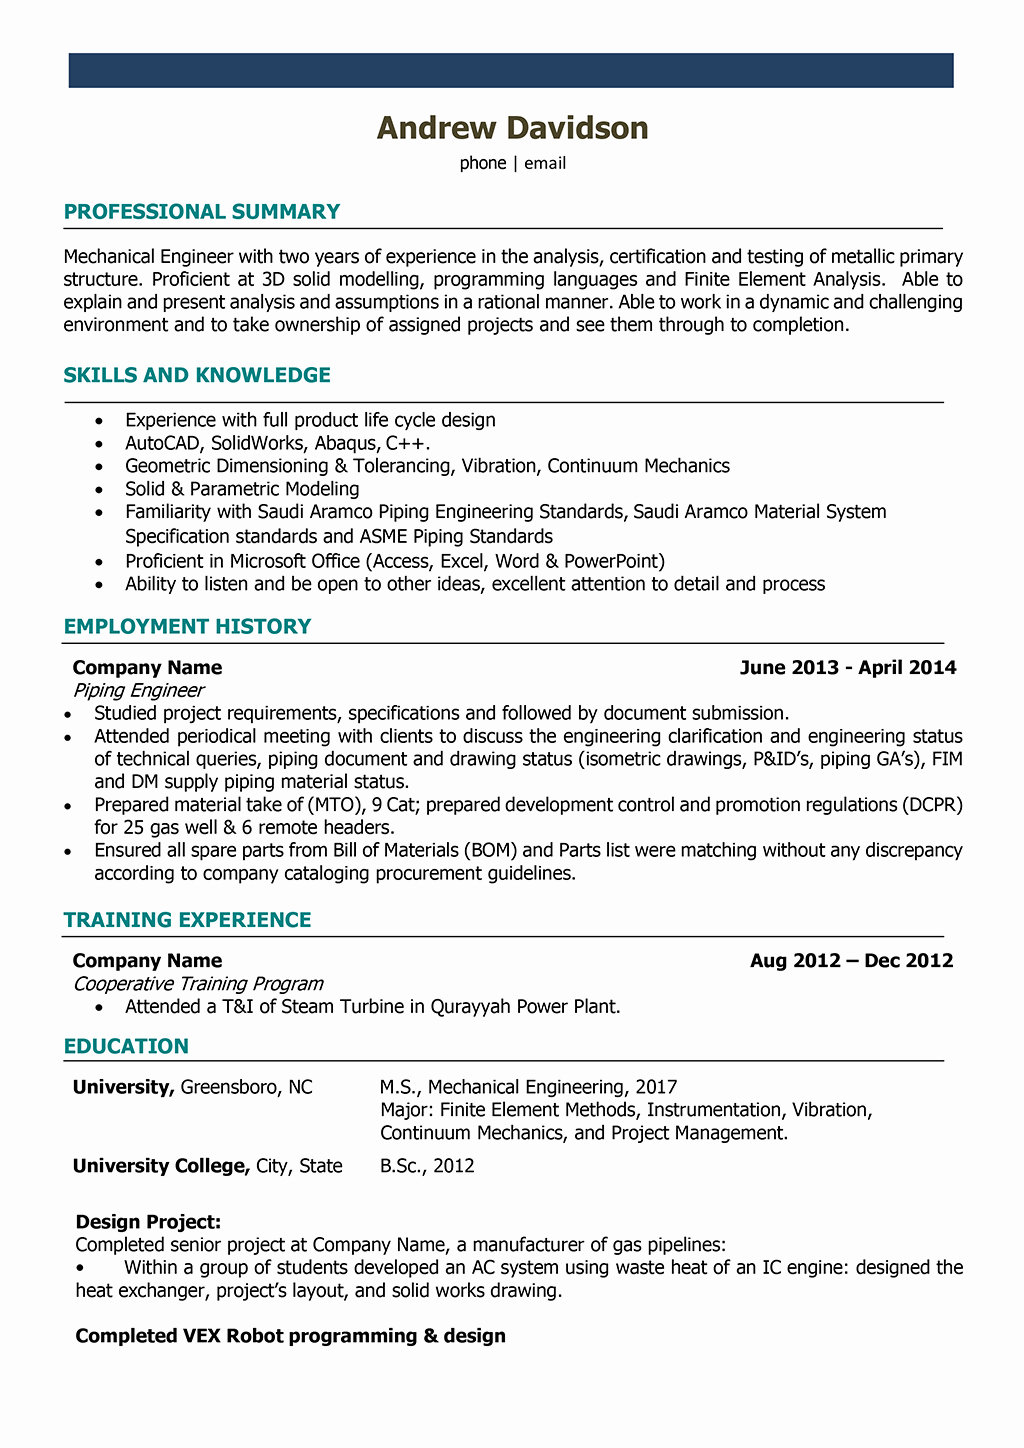 Mechanical Engineer Resume Samples and Writing Guide [10